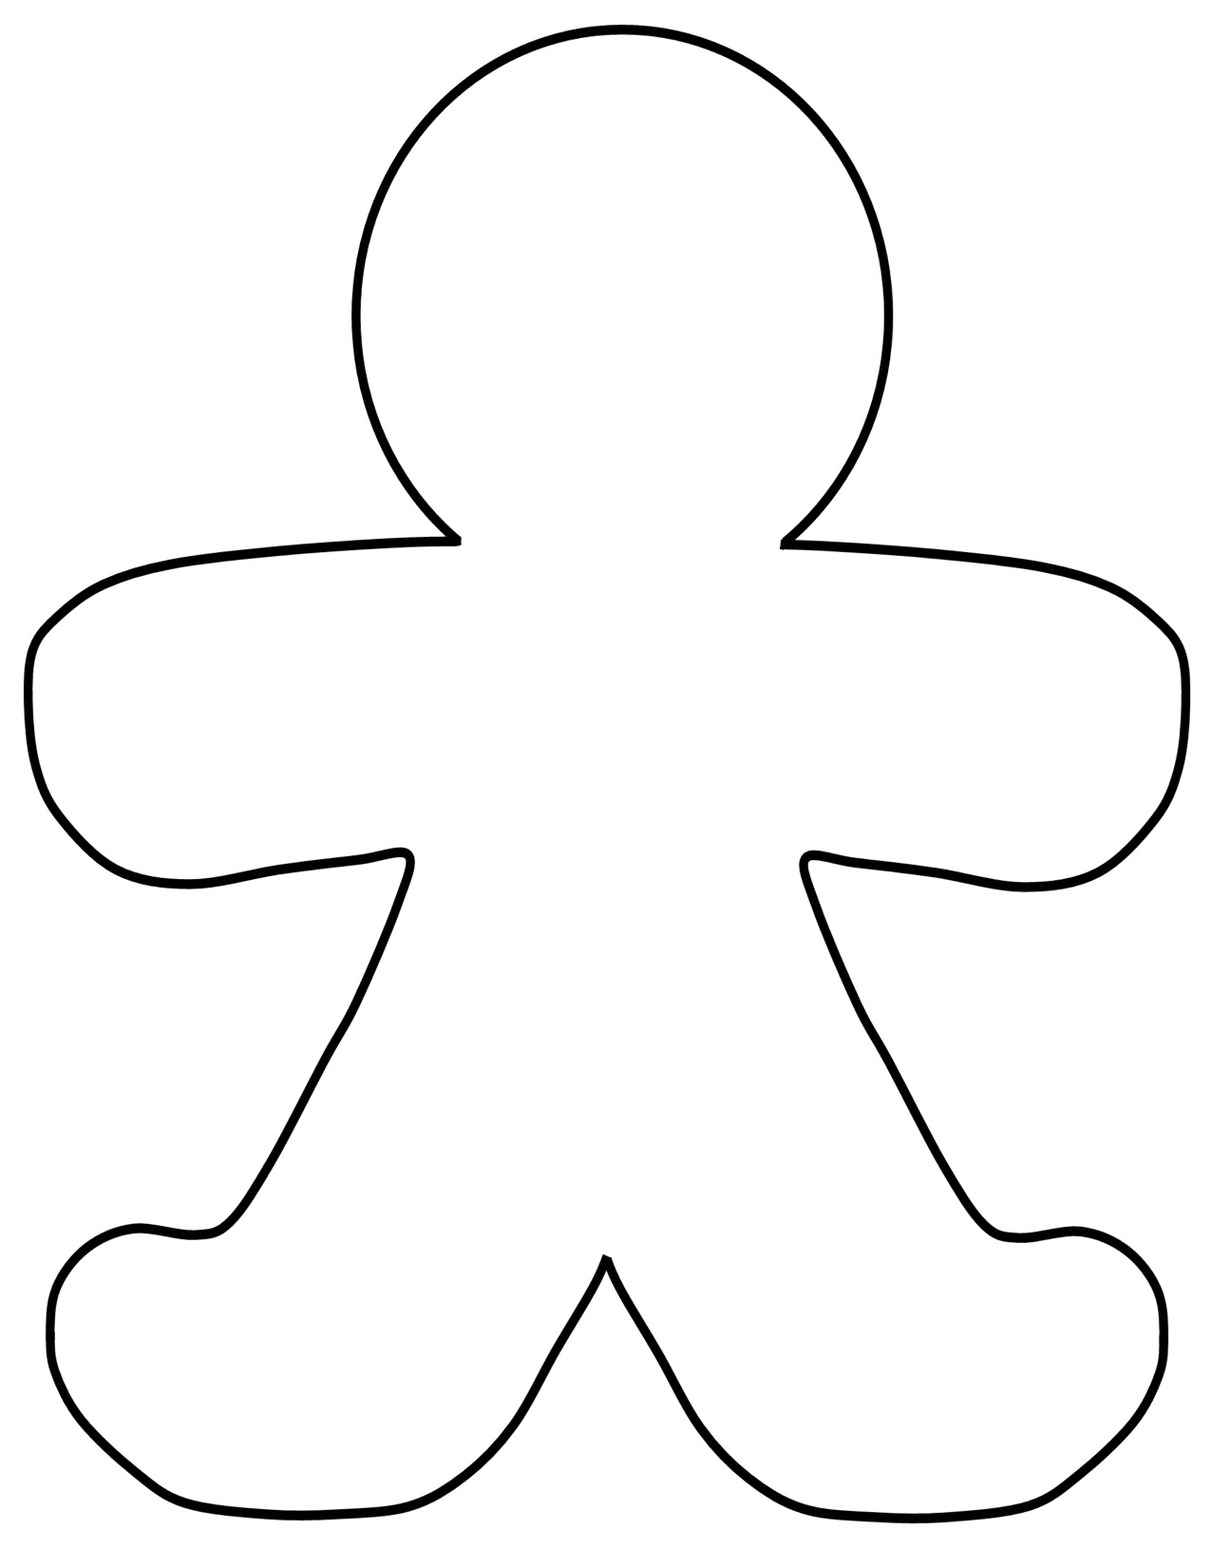 Body Map Template Clipart - Free to use Clip Art Resource Regarding Blank Body Map Template